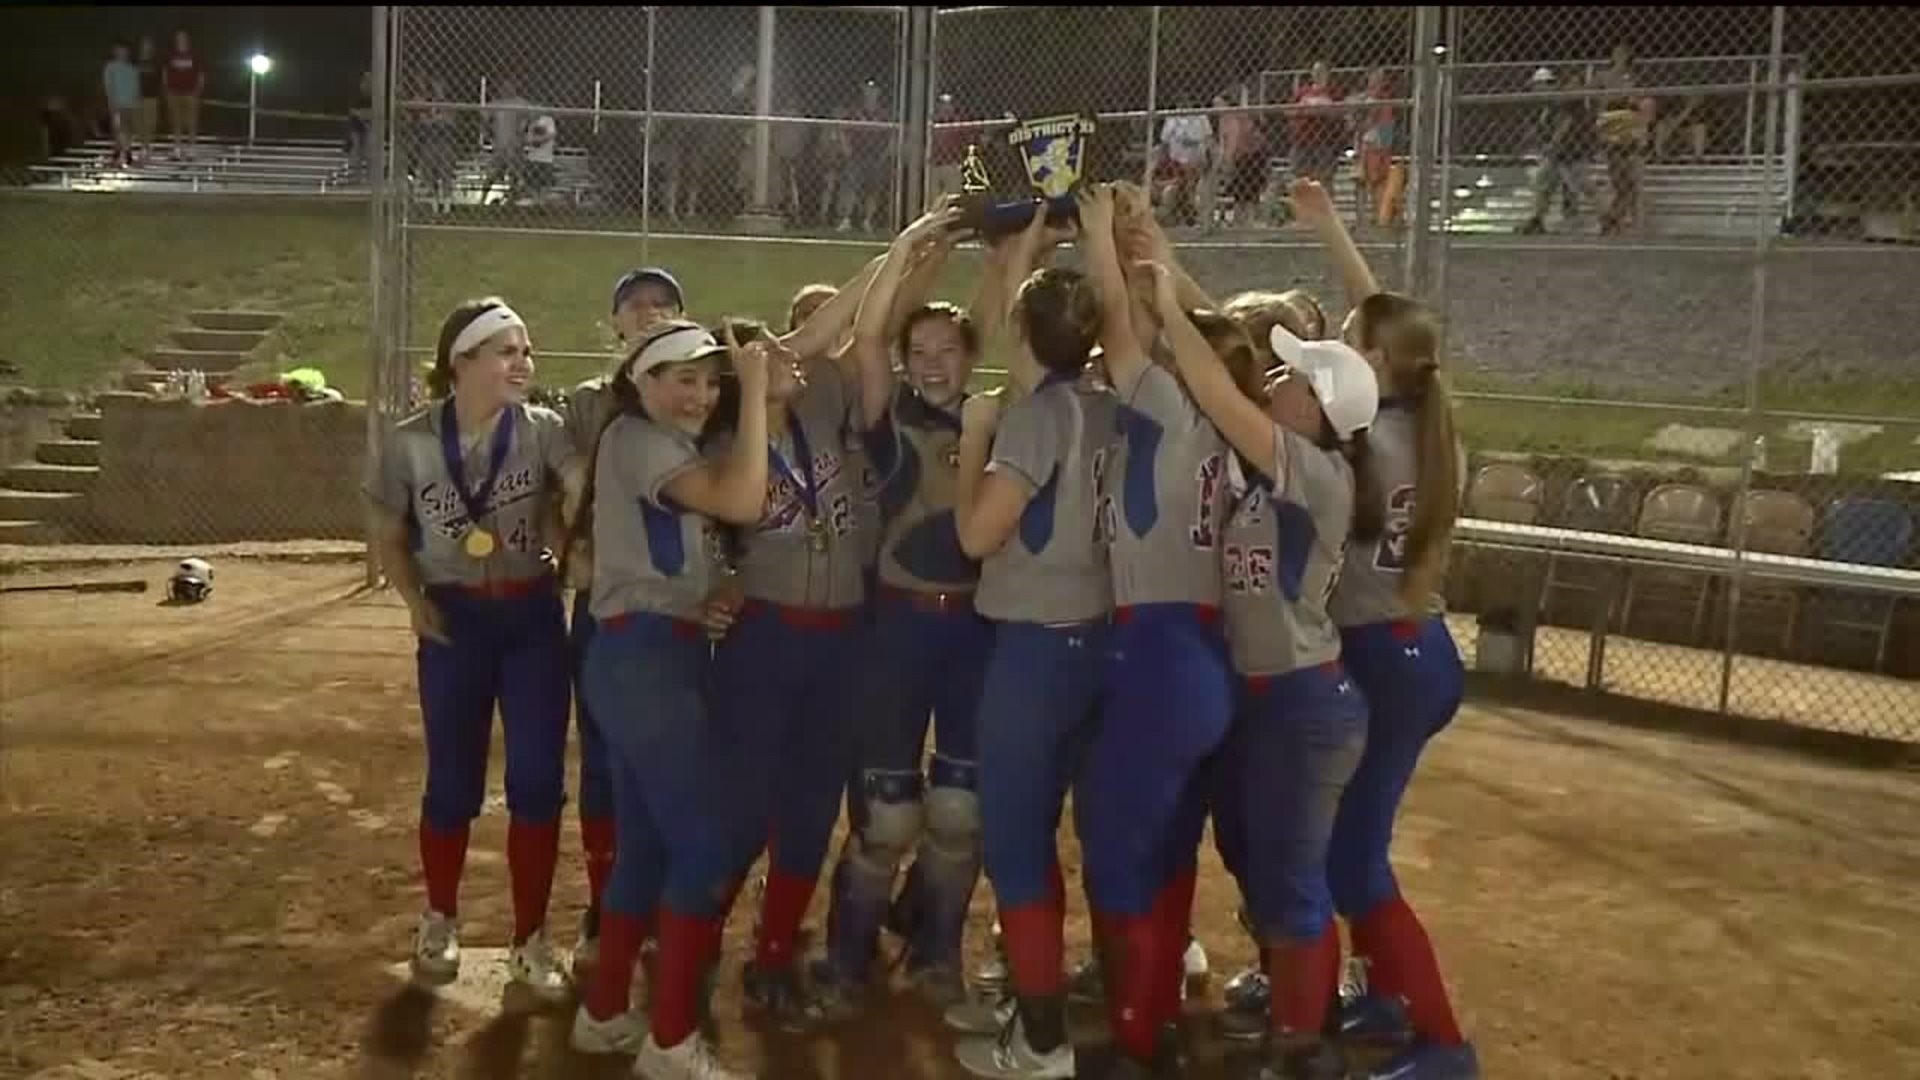 North Schuylkill Scores Late to Top Pine Grove Area in District Softball Title